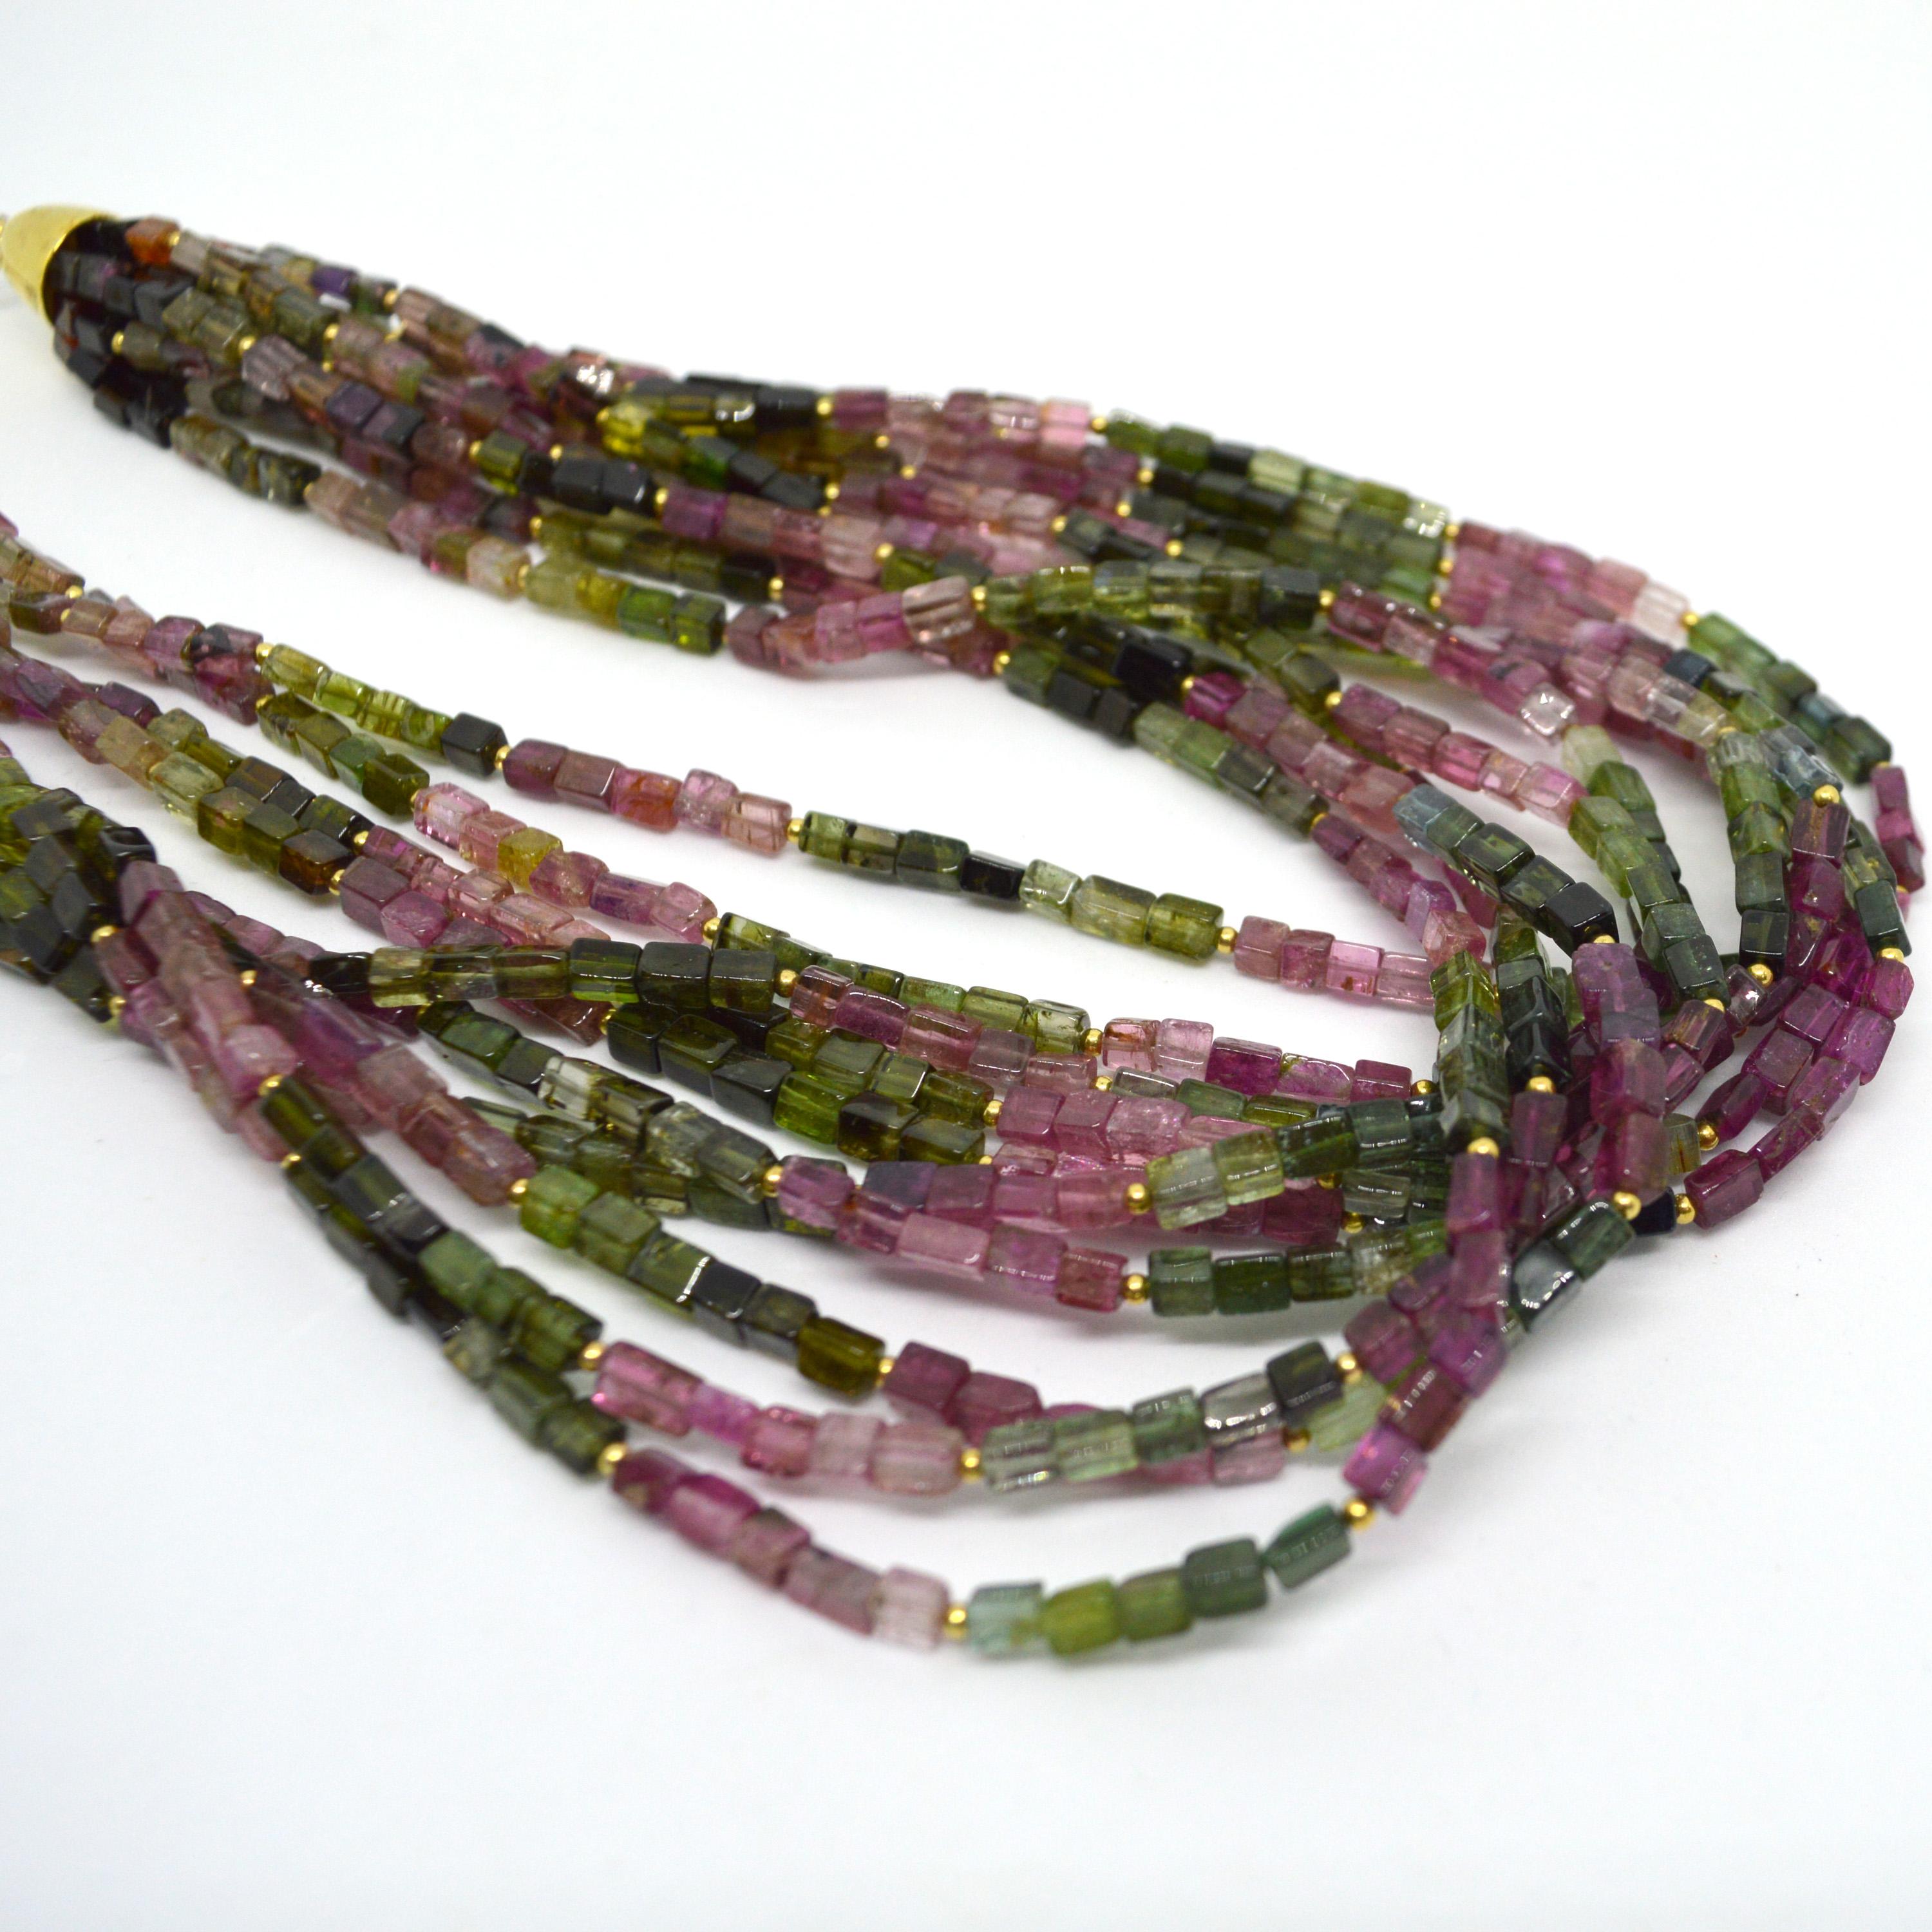 What a statement this necklace makes with 10 strands of vibrant multi coloured Tourmaline beads, each bead is approximately 3x5mm and have accent 2mm 14k Gold filled round beads for additional sparkle 
Necklace if finished with a high polish Gold